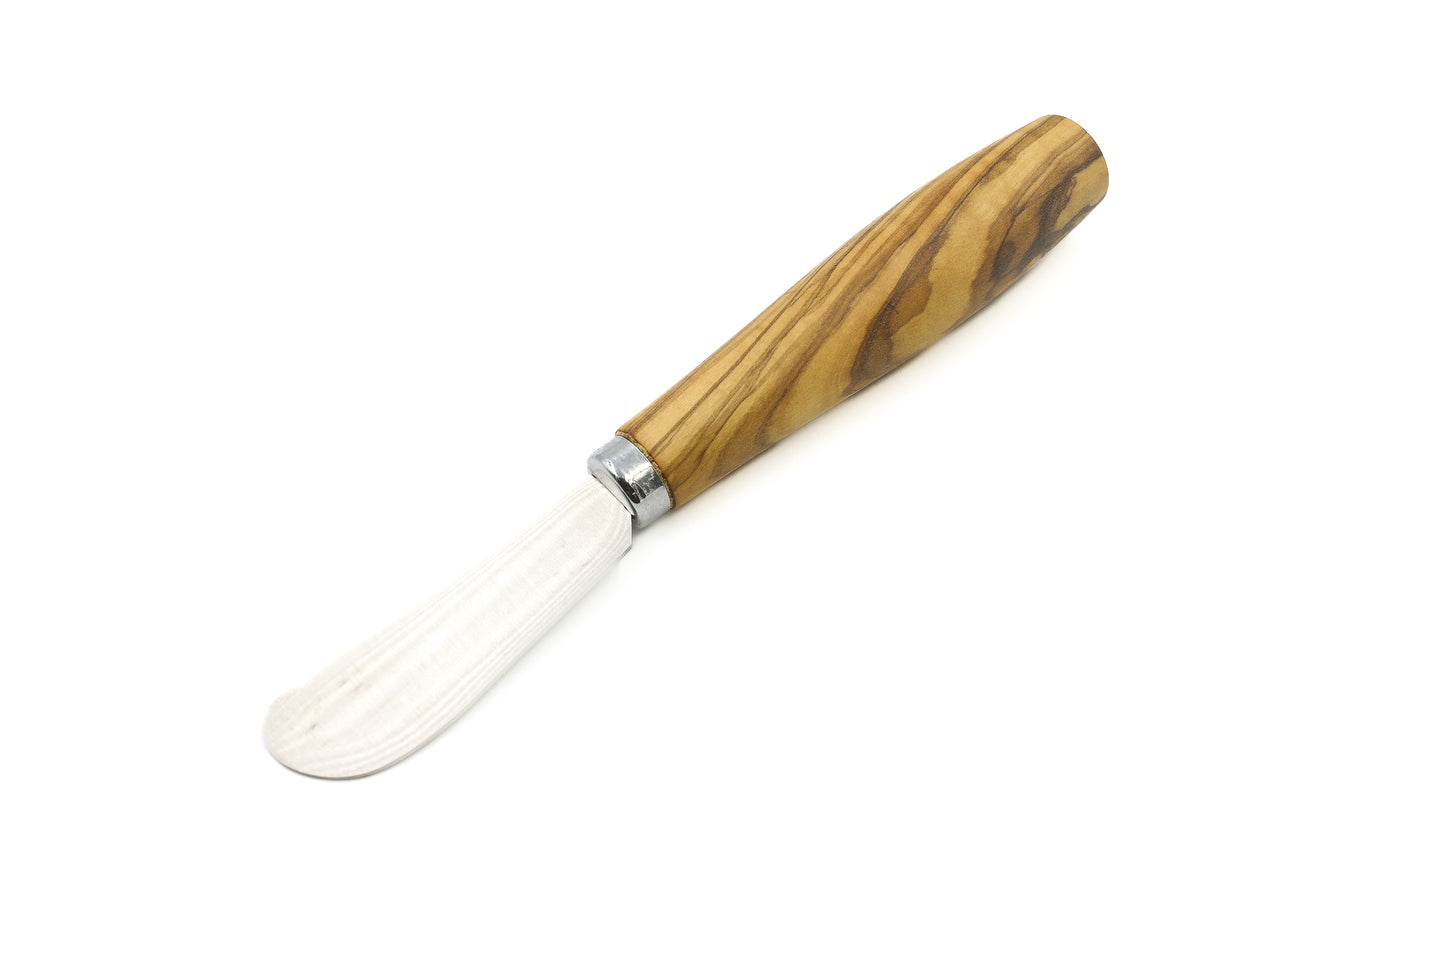 Unique olive wood cheese cutlery collection with 7 distinct knives